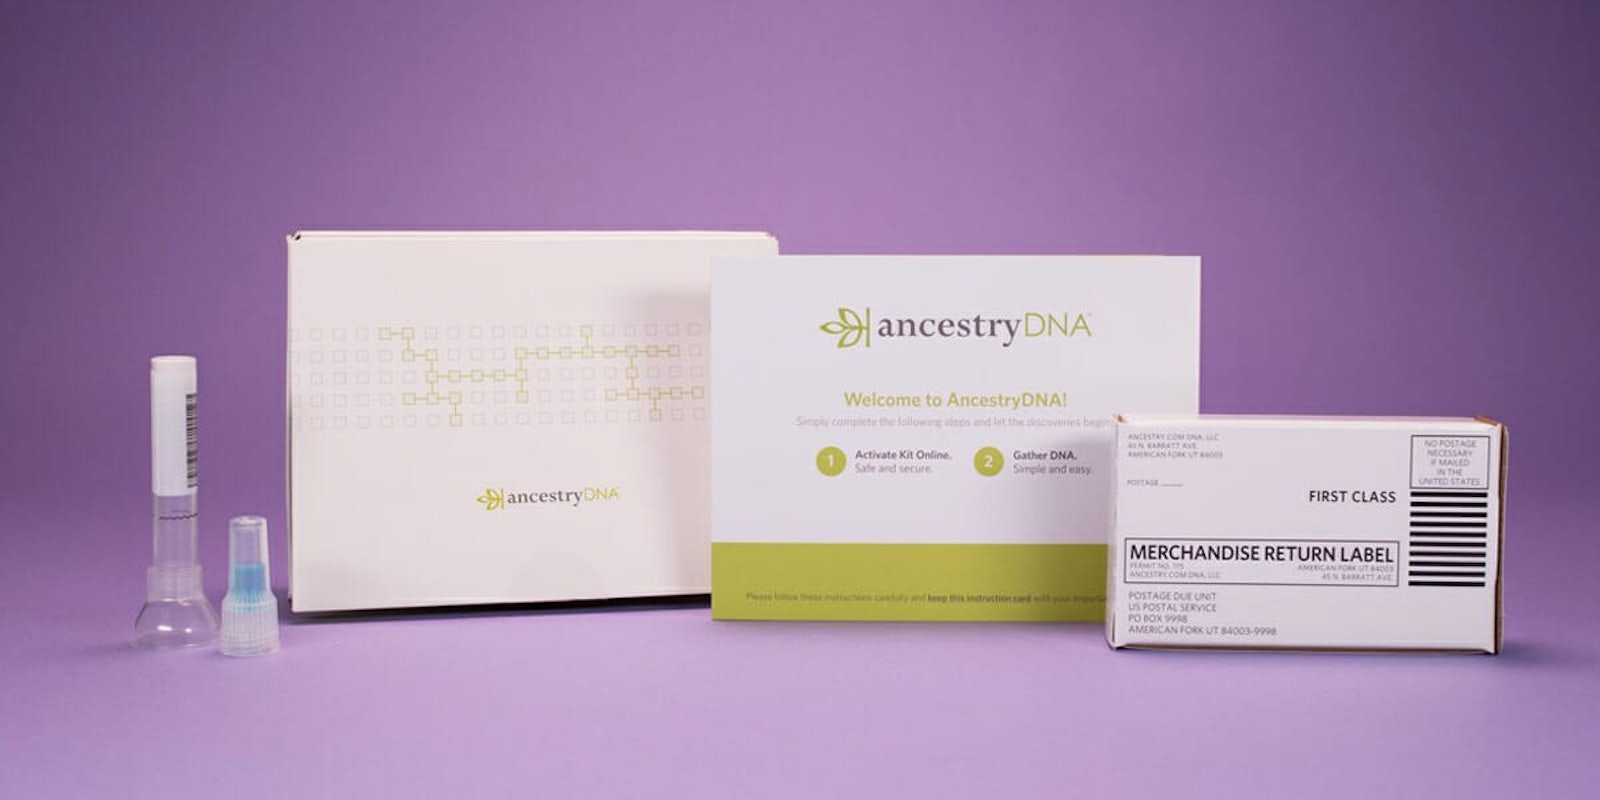 ancestry dna cyber monday deal